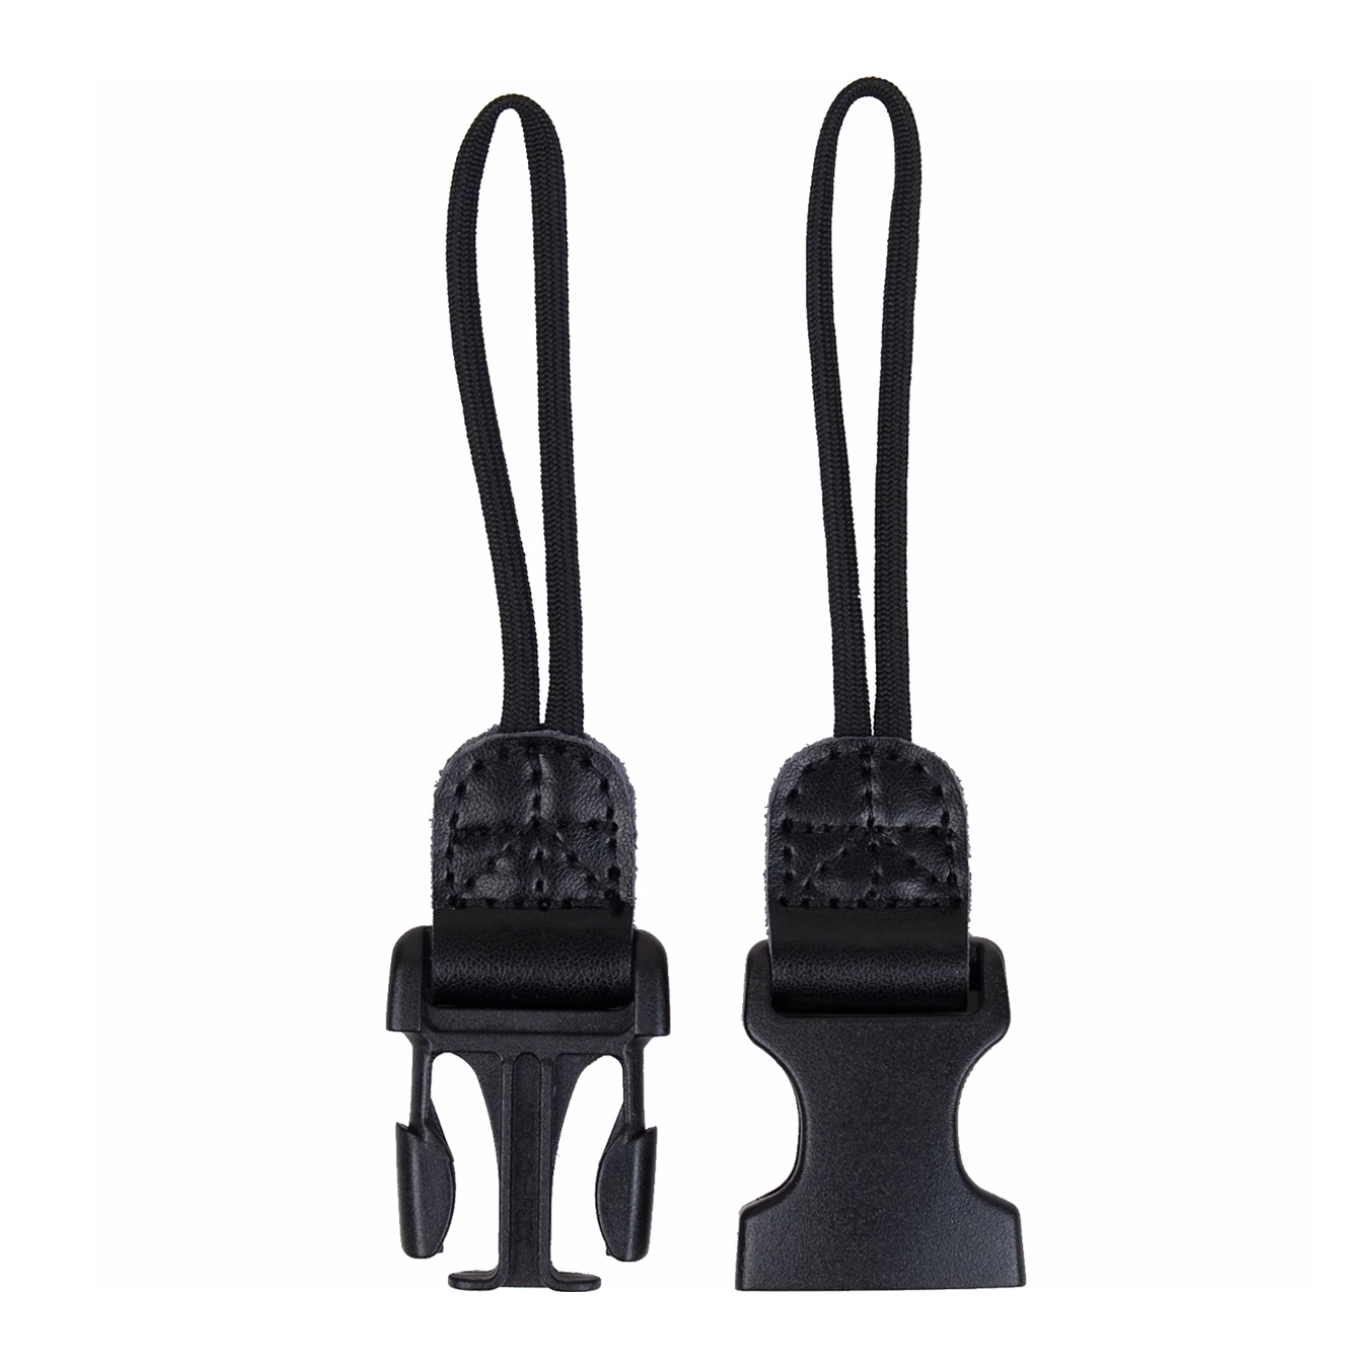 Protec - Camera Connectors for Protec Camera Straps/Slings (One Pair)-Accessories-Protec-Music Elements